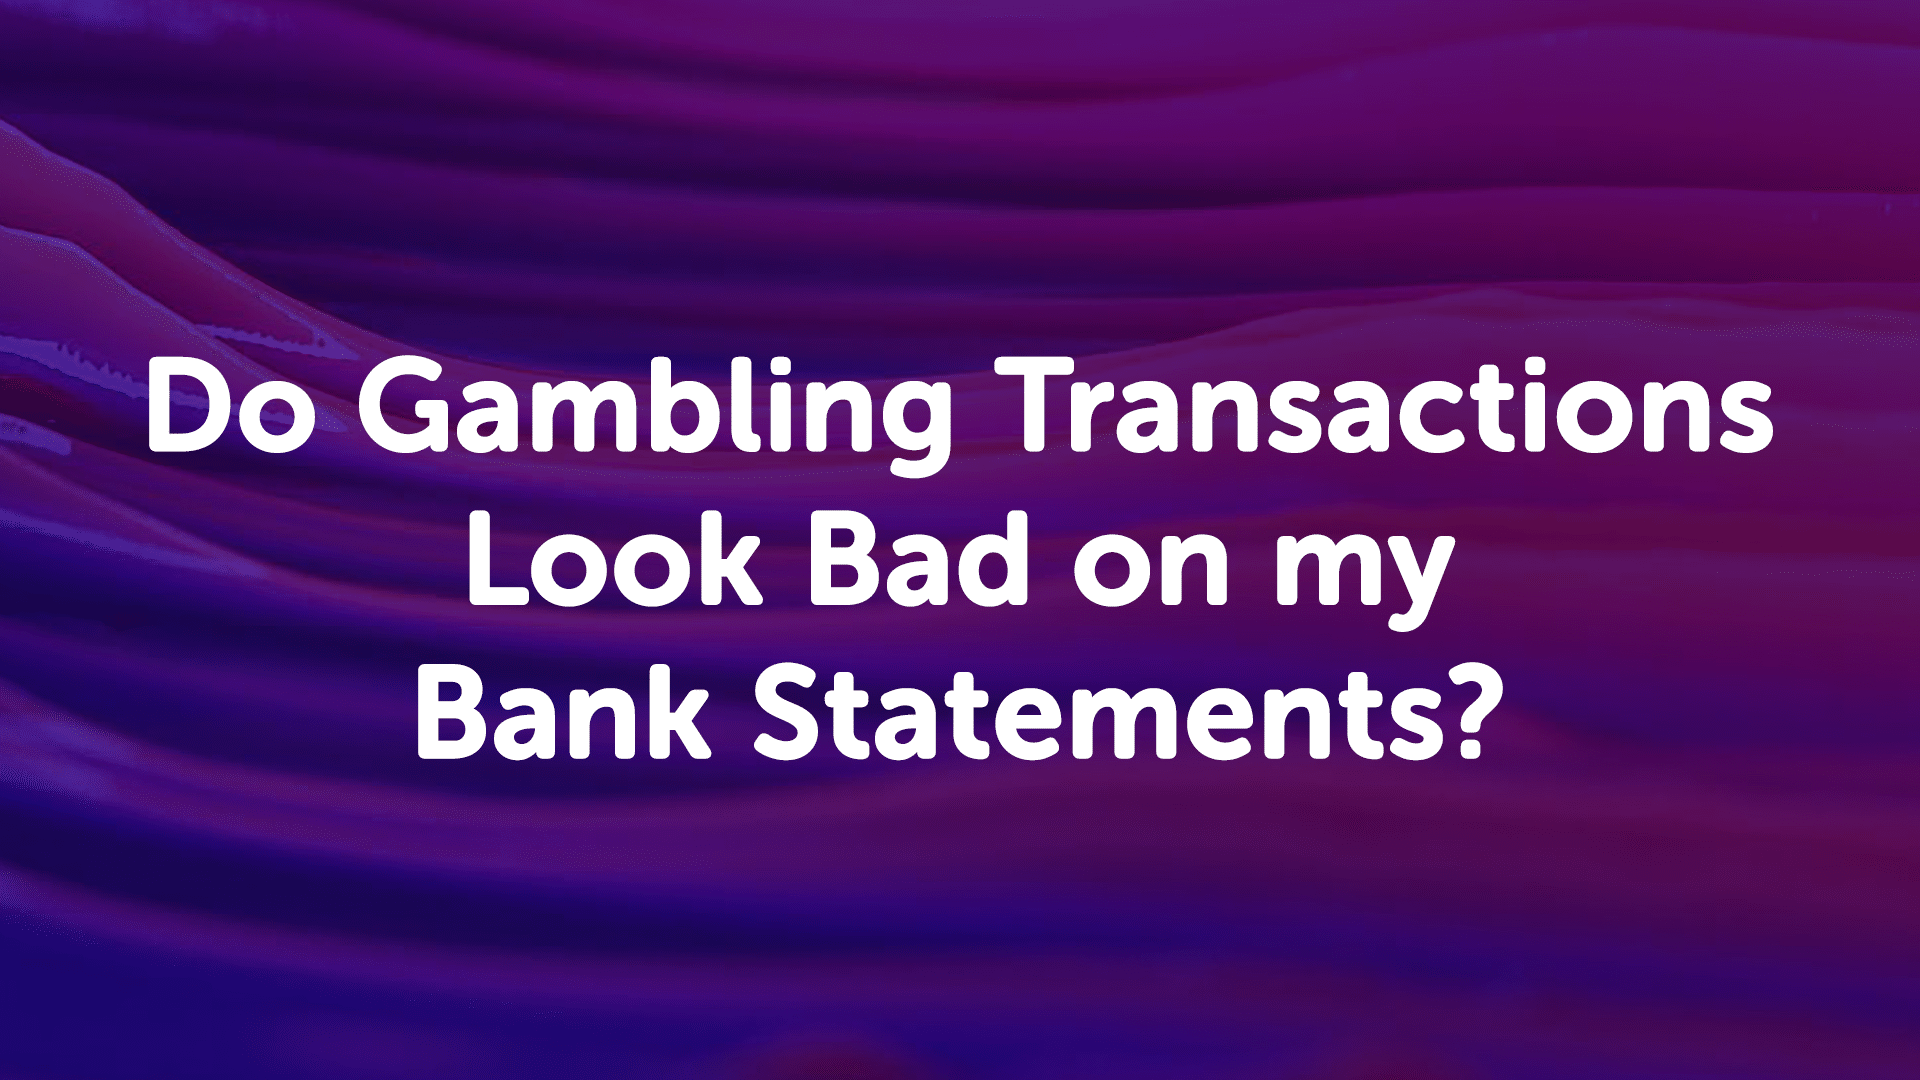 Do Gambling Transactions Look Bad on My Bank Statements in London?